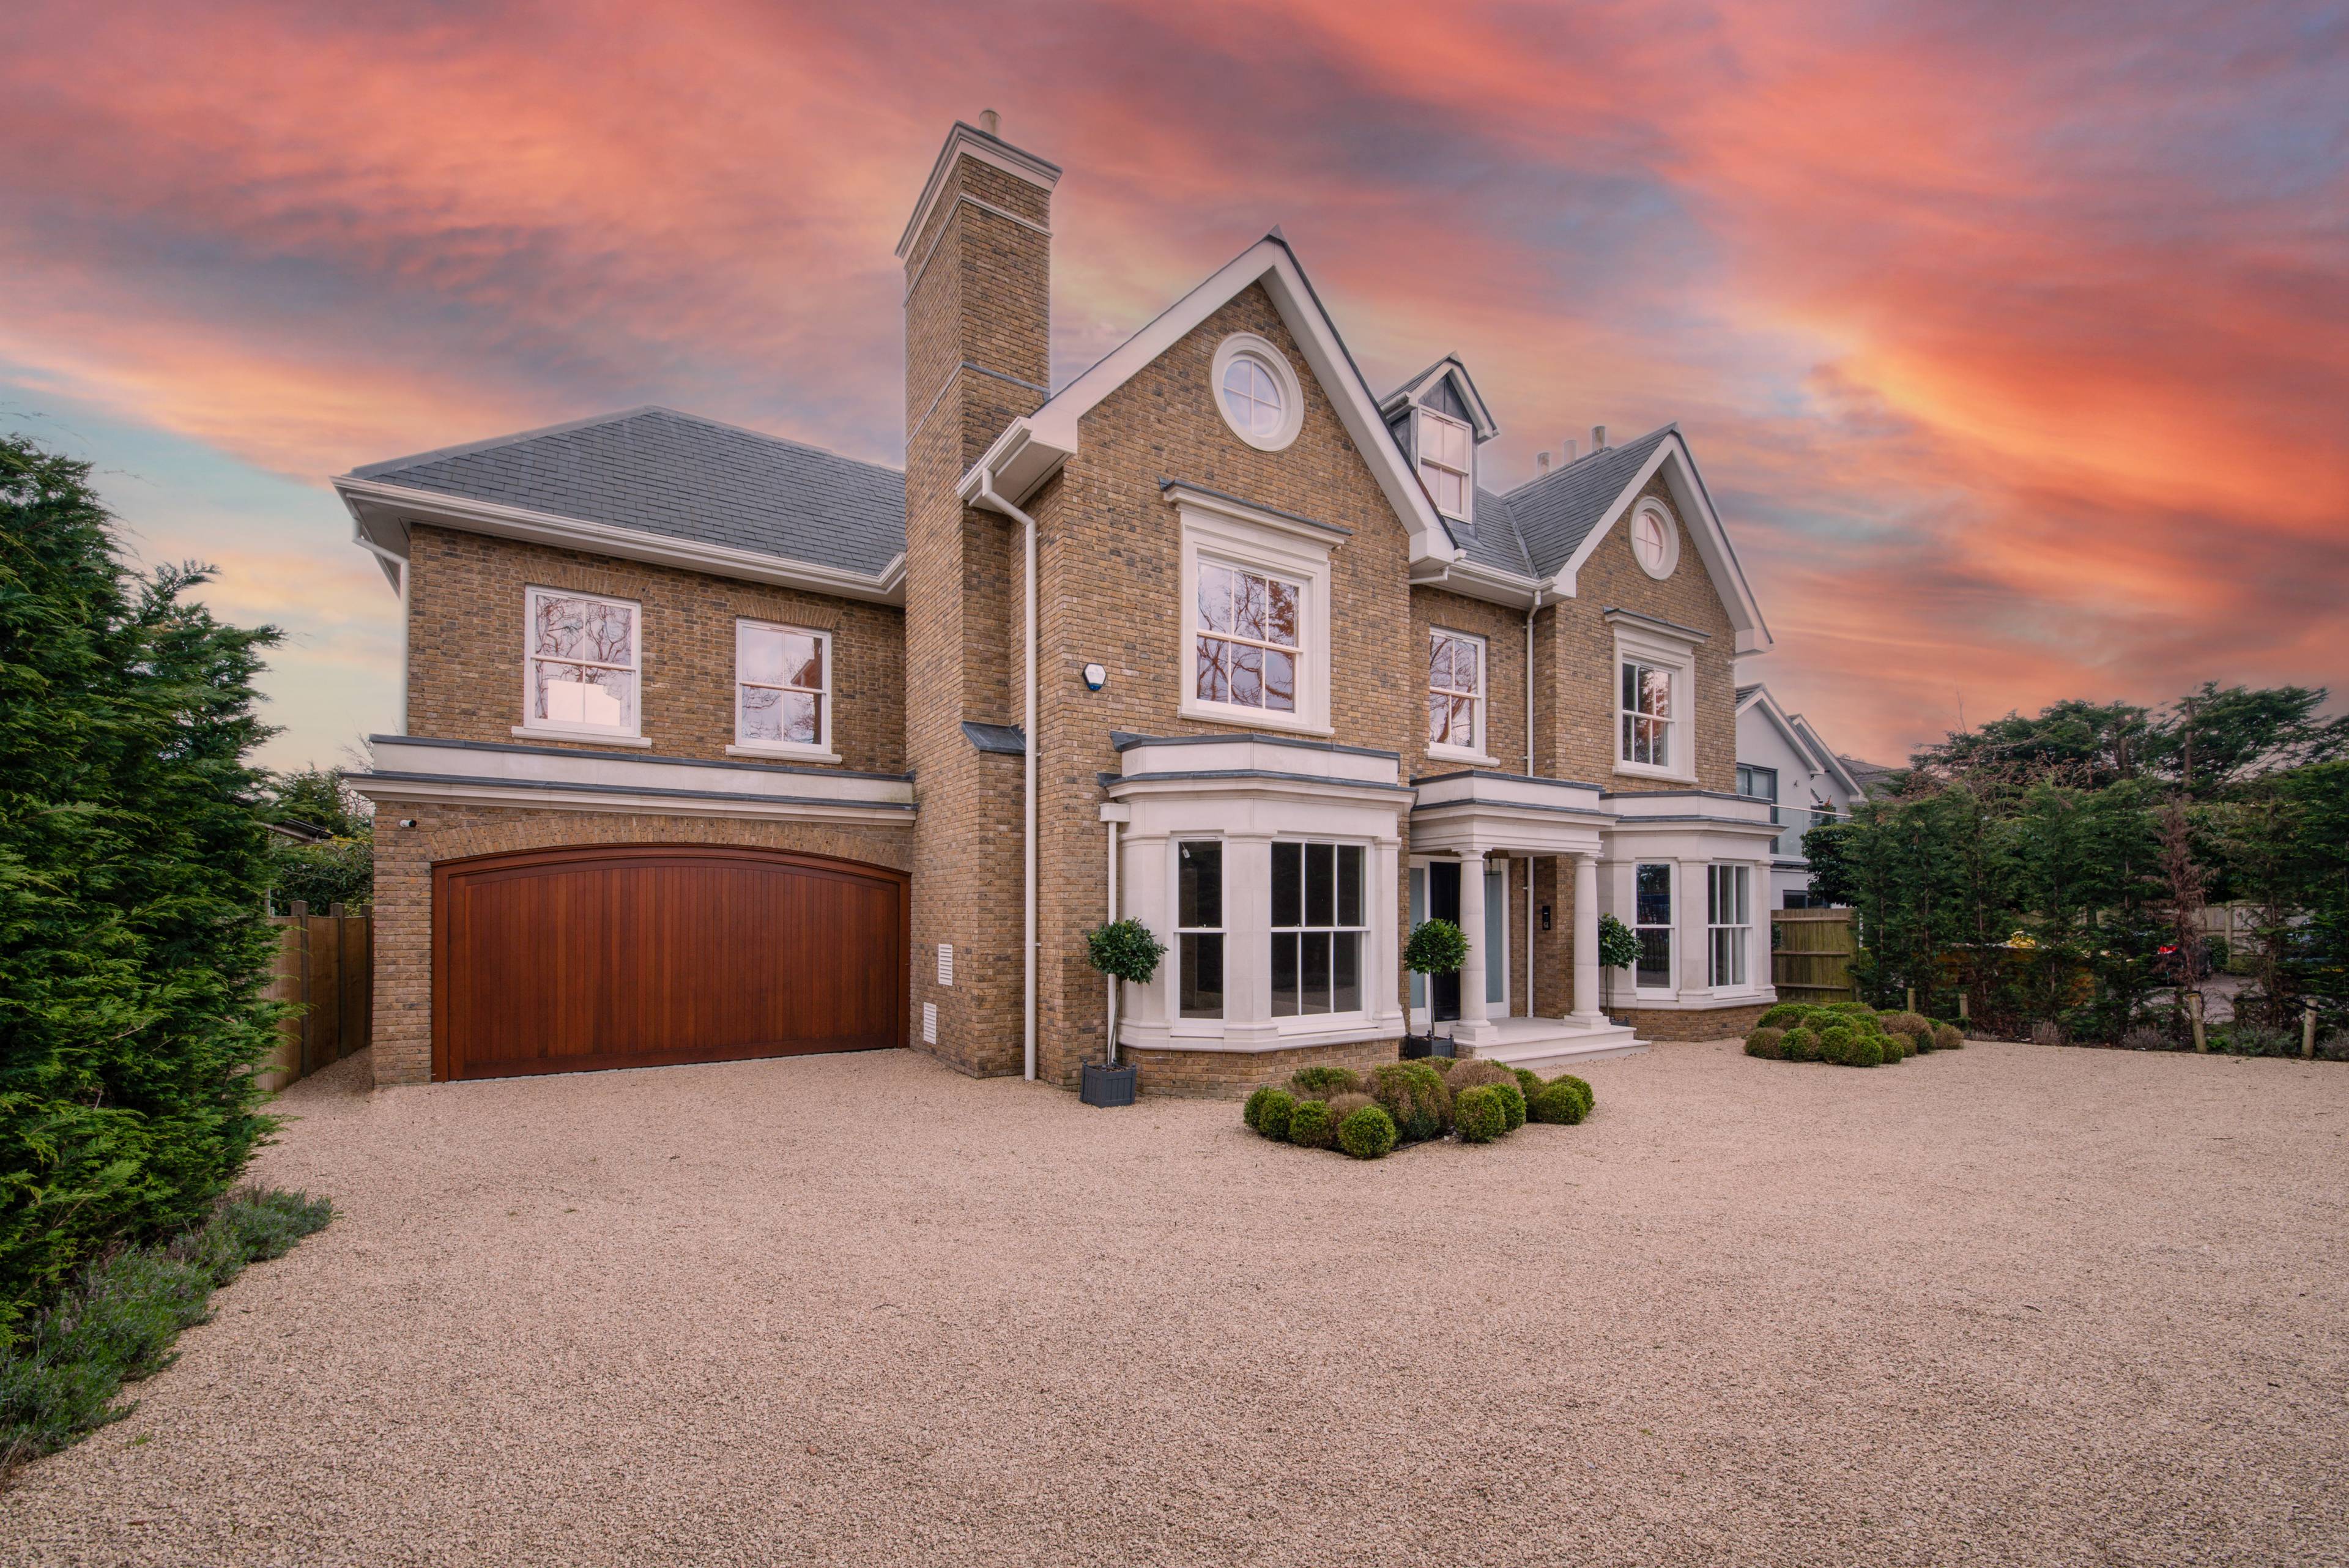 This 11,000 sq ft new build family home is discretely located within an exclusive North London area of Arkley, offering views across a private Golf Course.